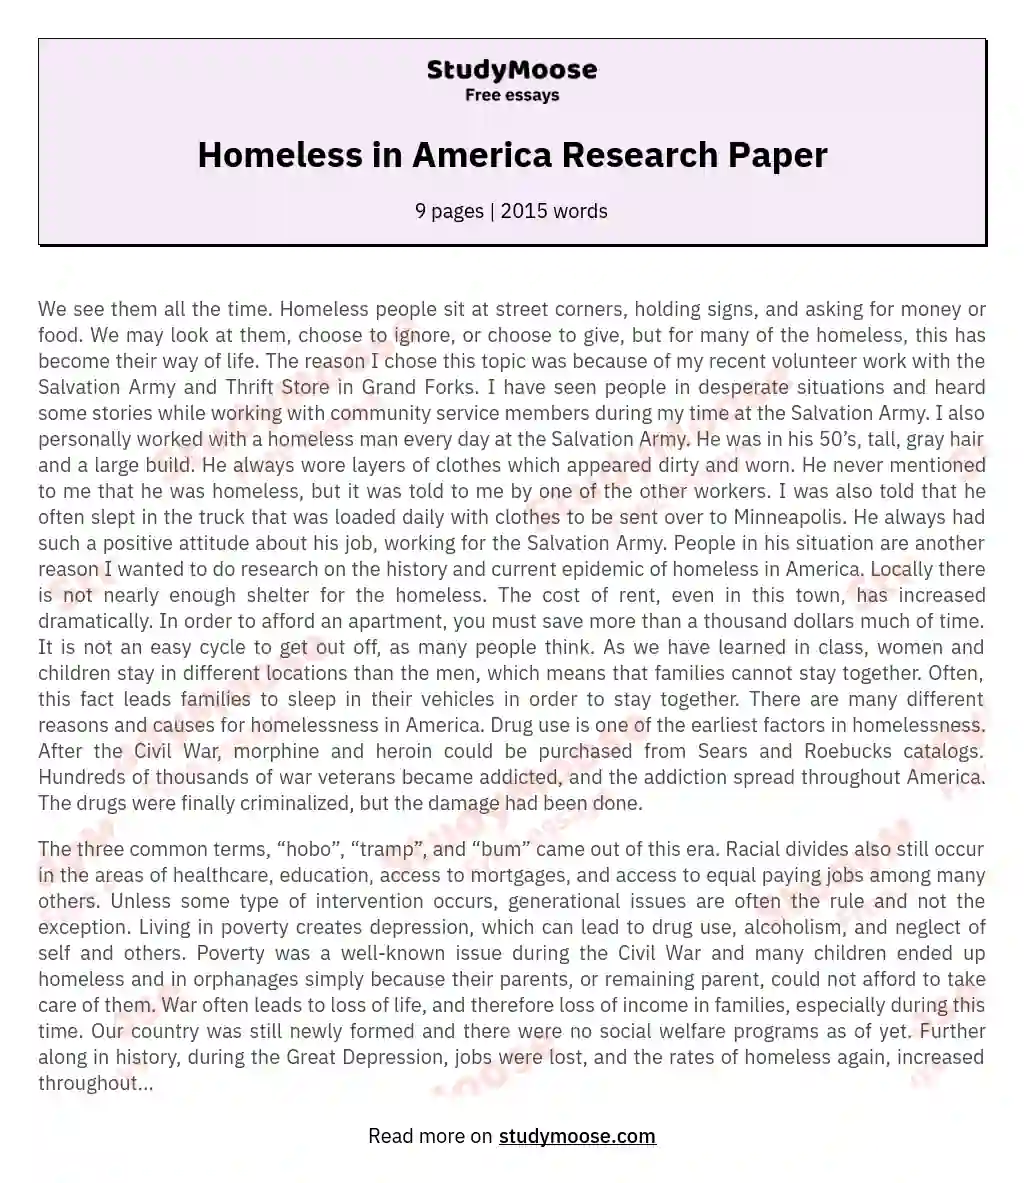 Homeless in America Research Paper essay